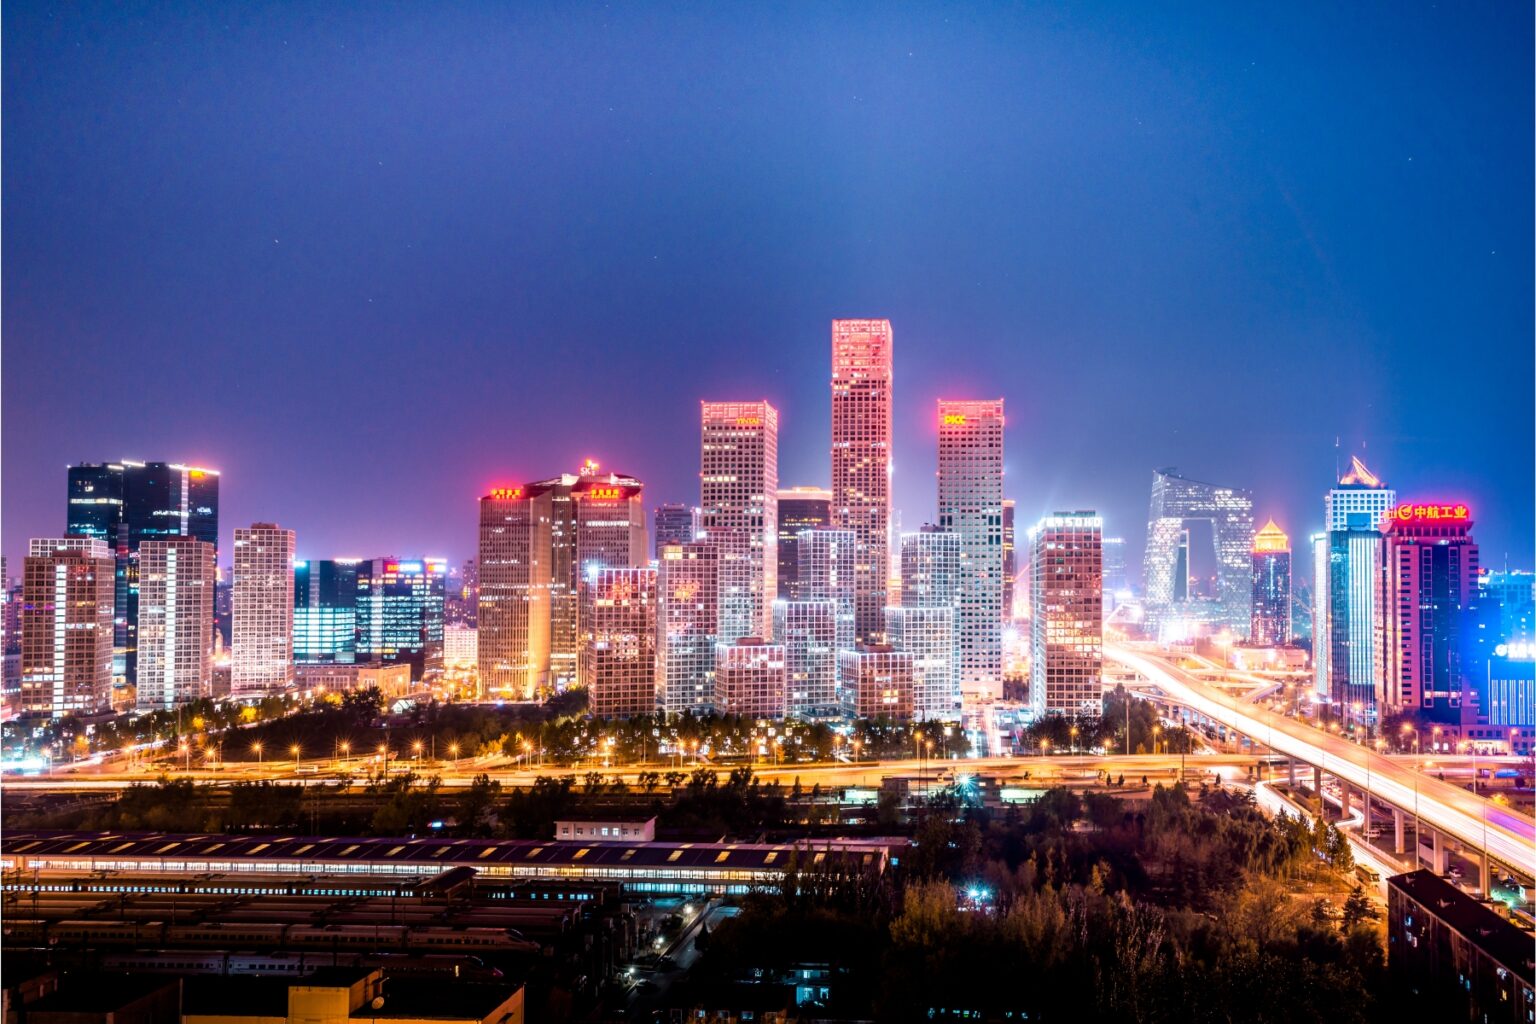 a view of the beijing city skyline by night